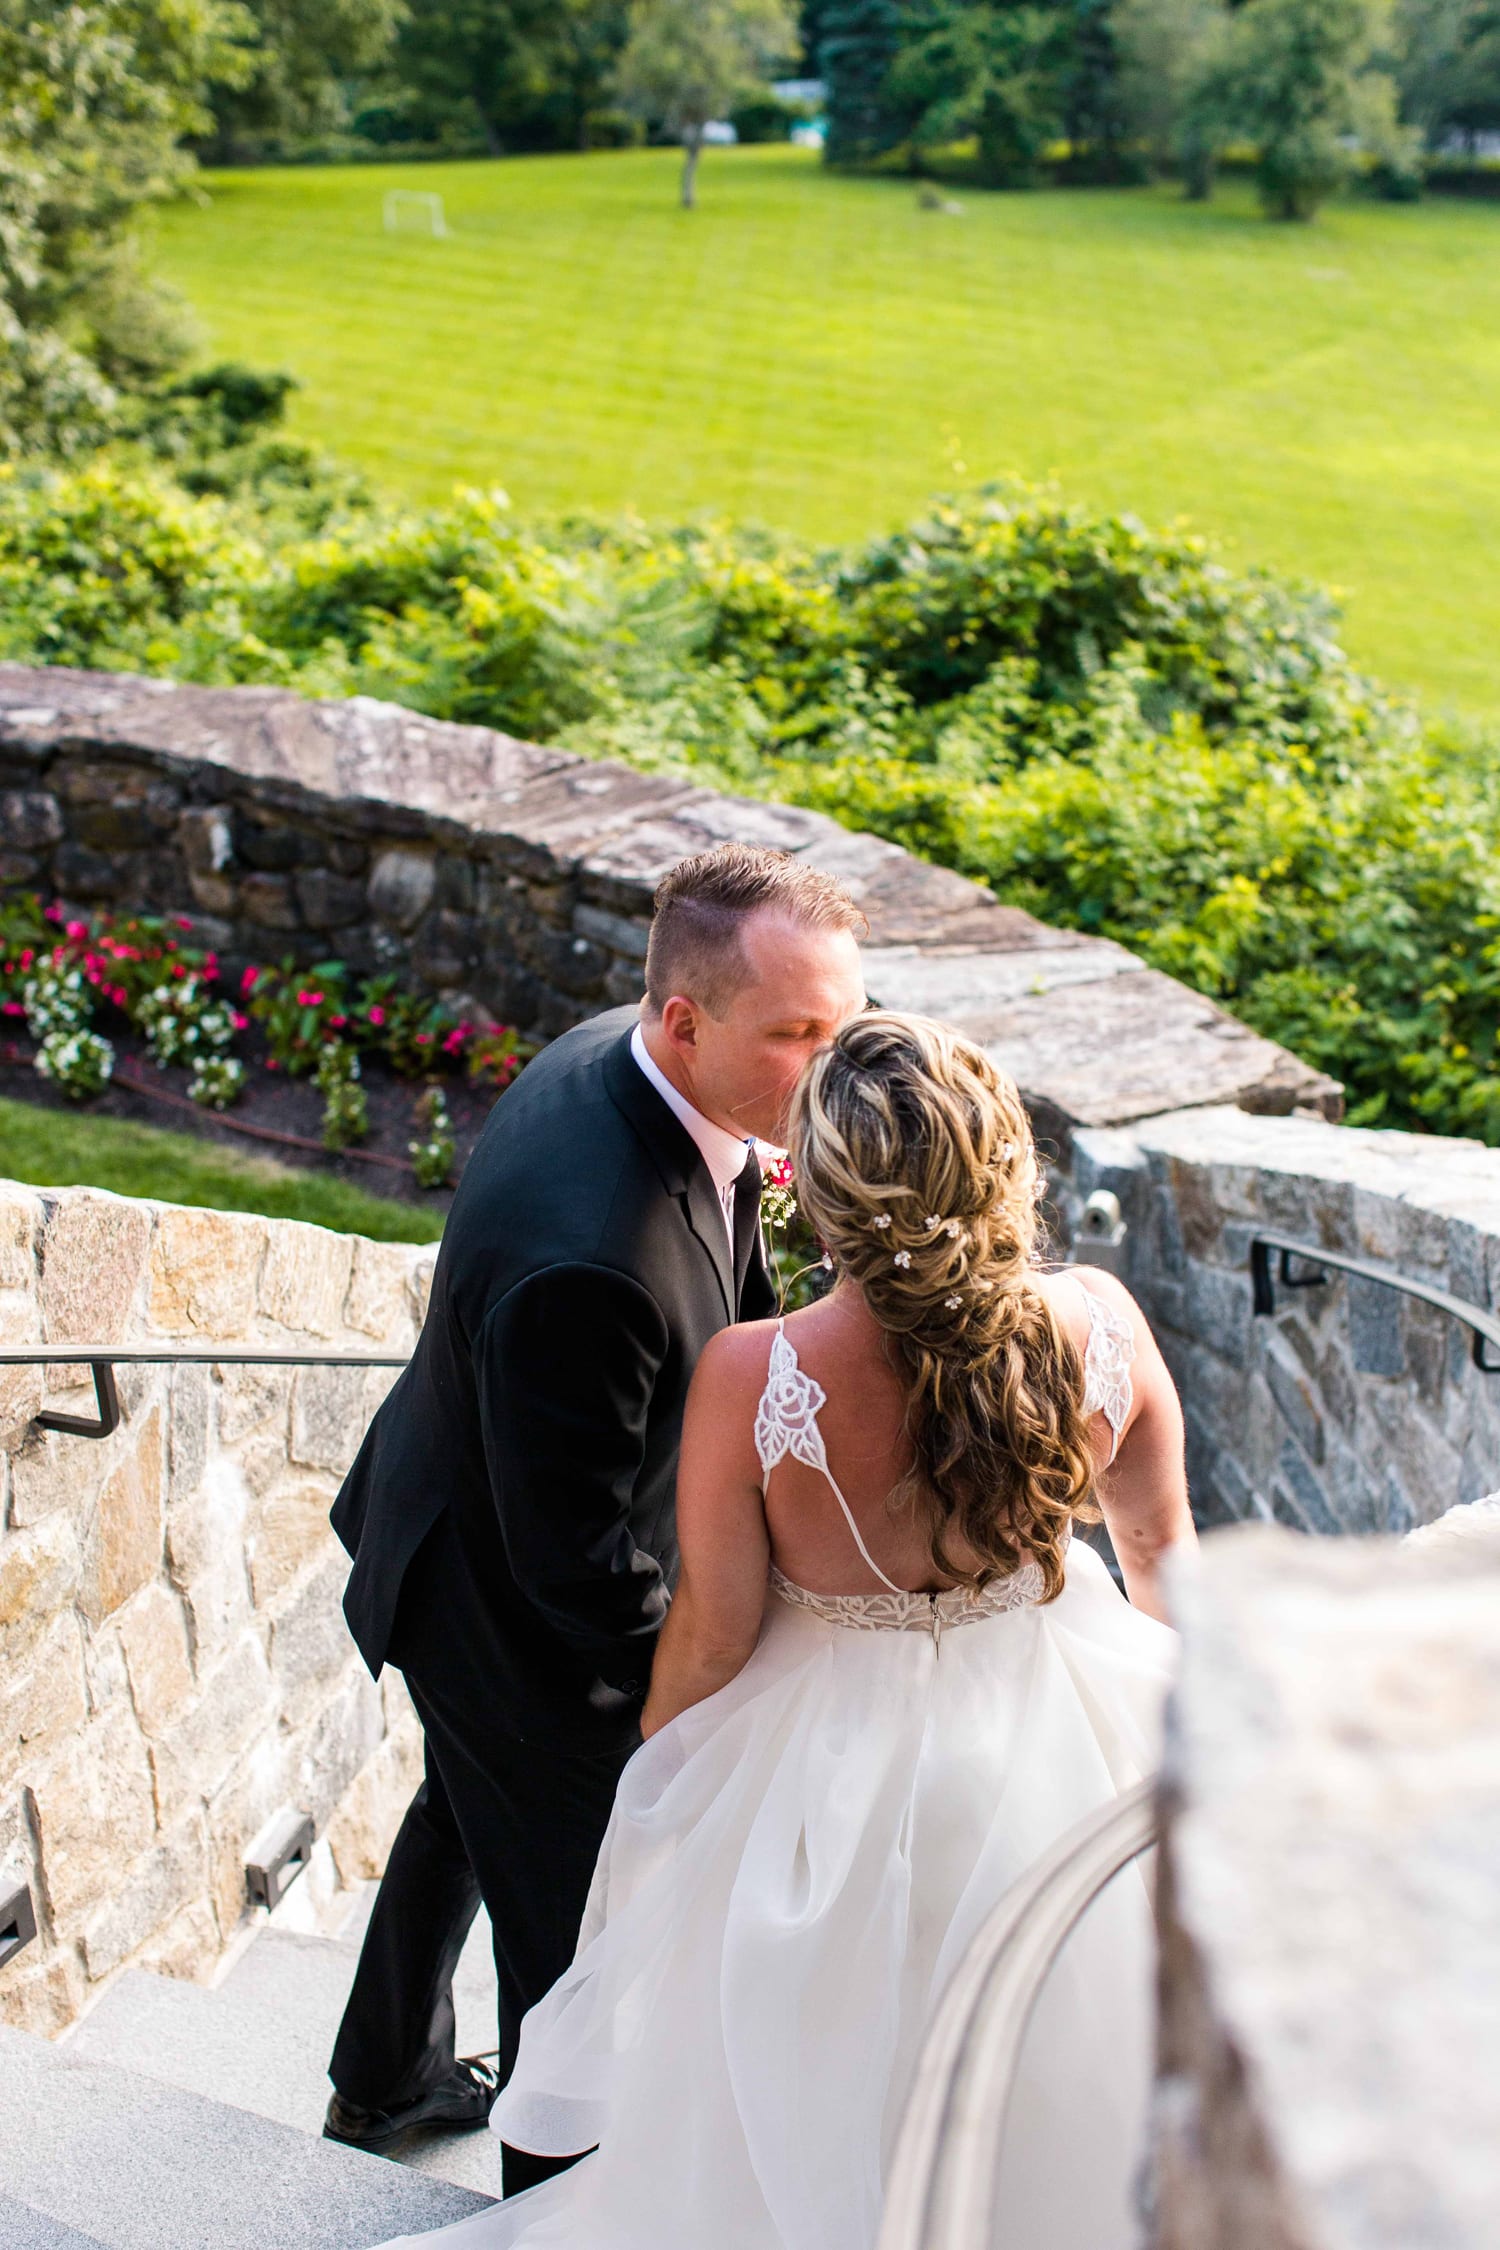 Wedding photography at Le Chateau in South Salem, NY